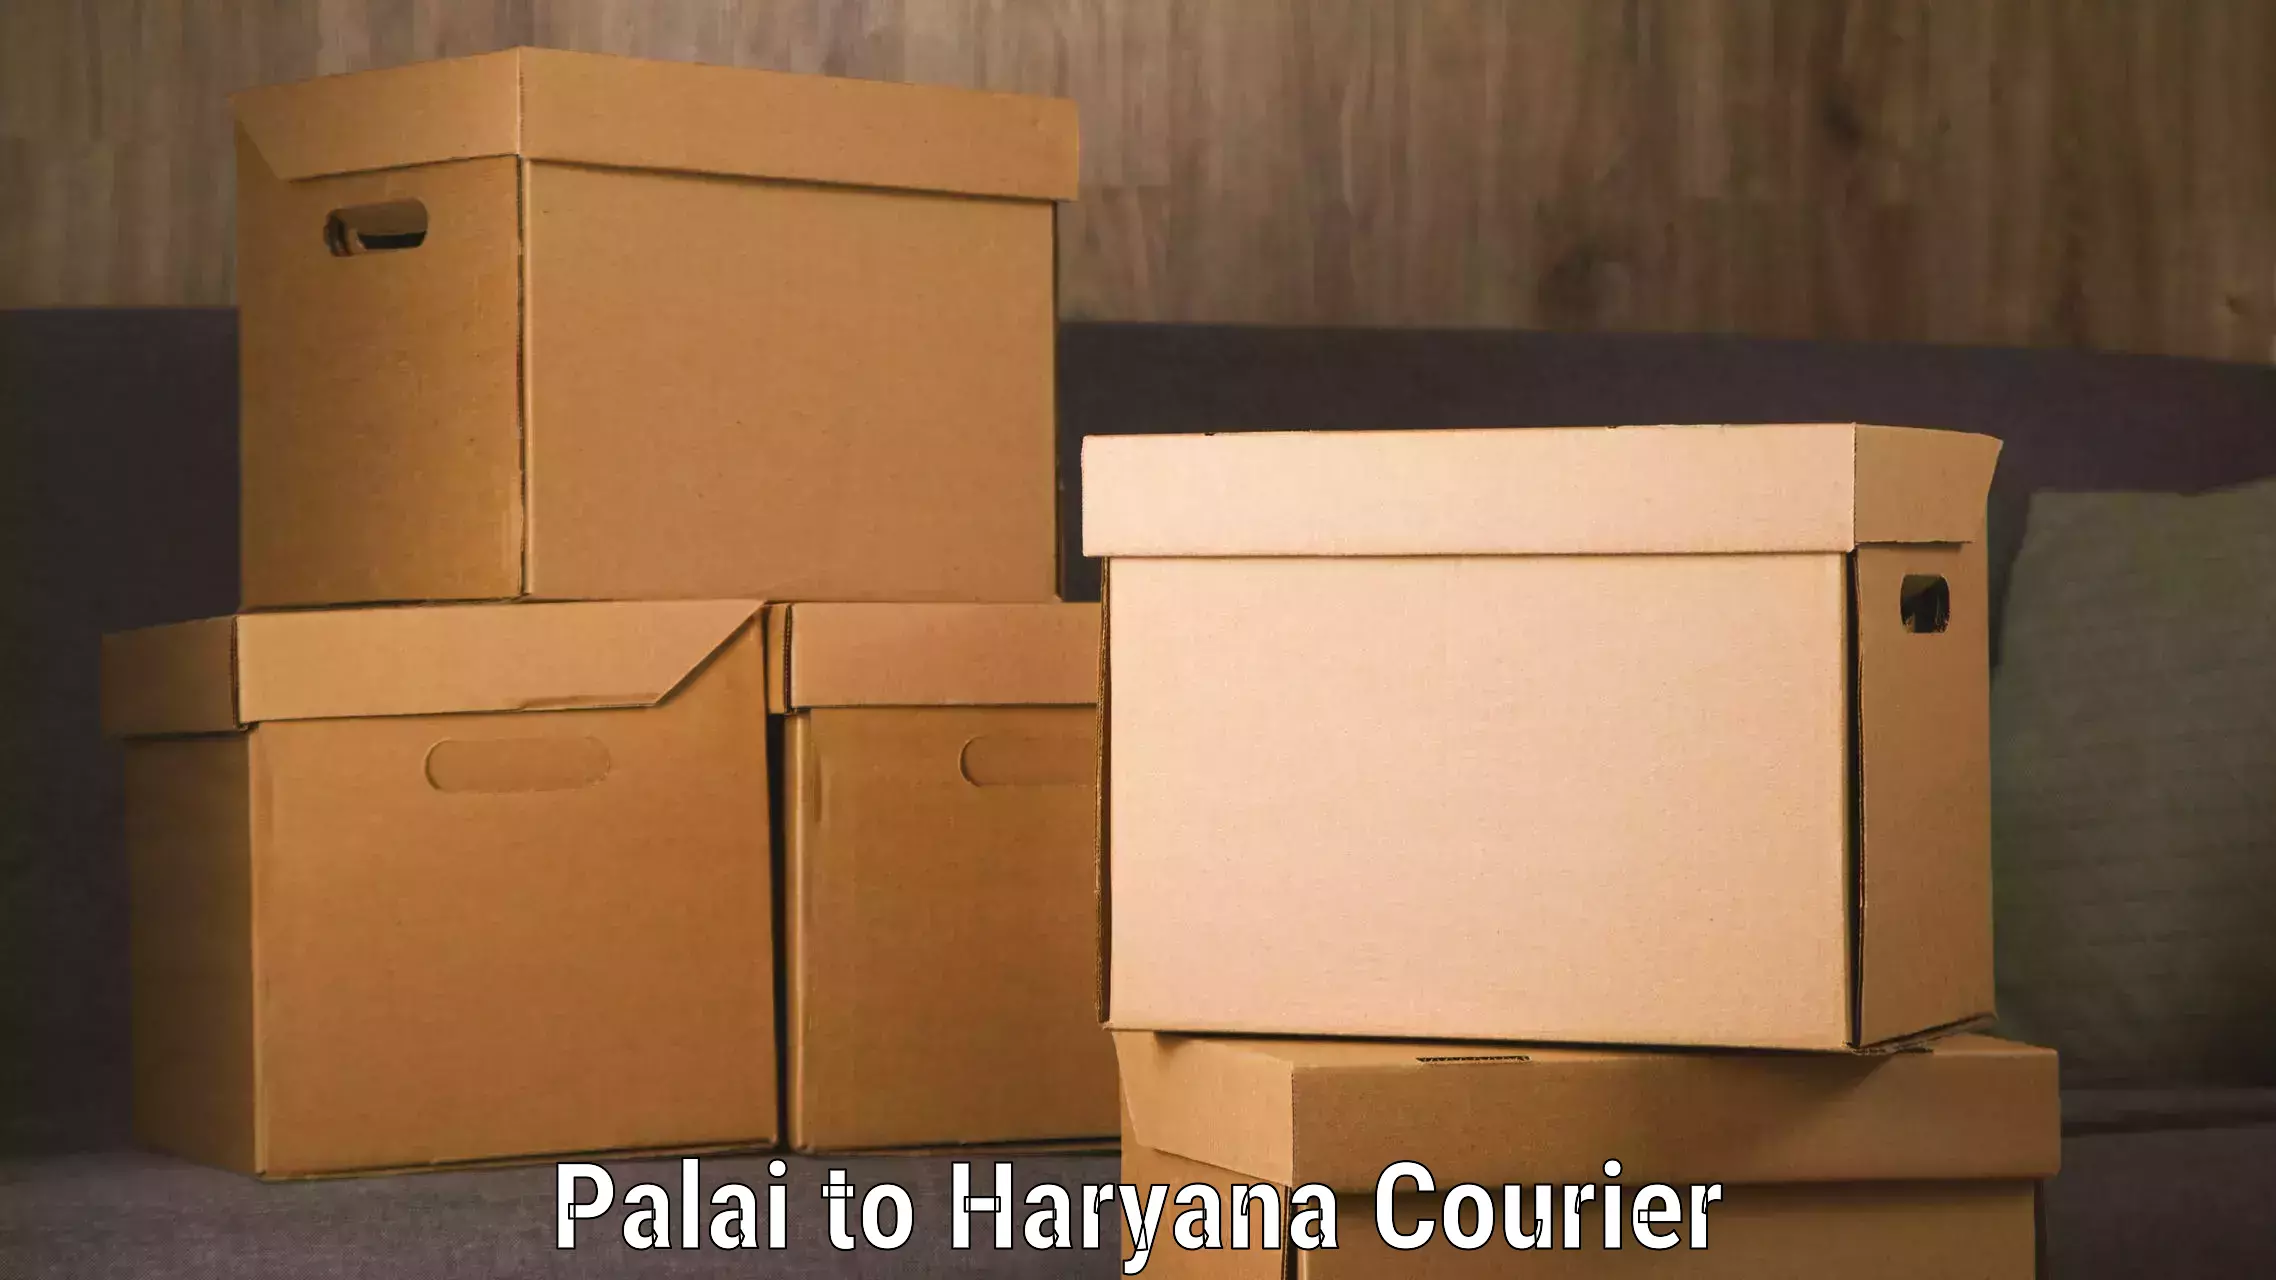 Global shipping networks in Palai to Haryana